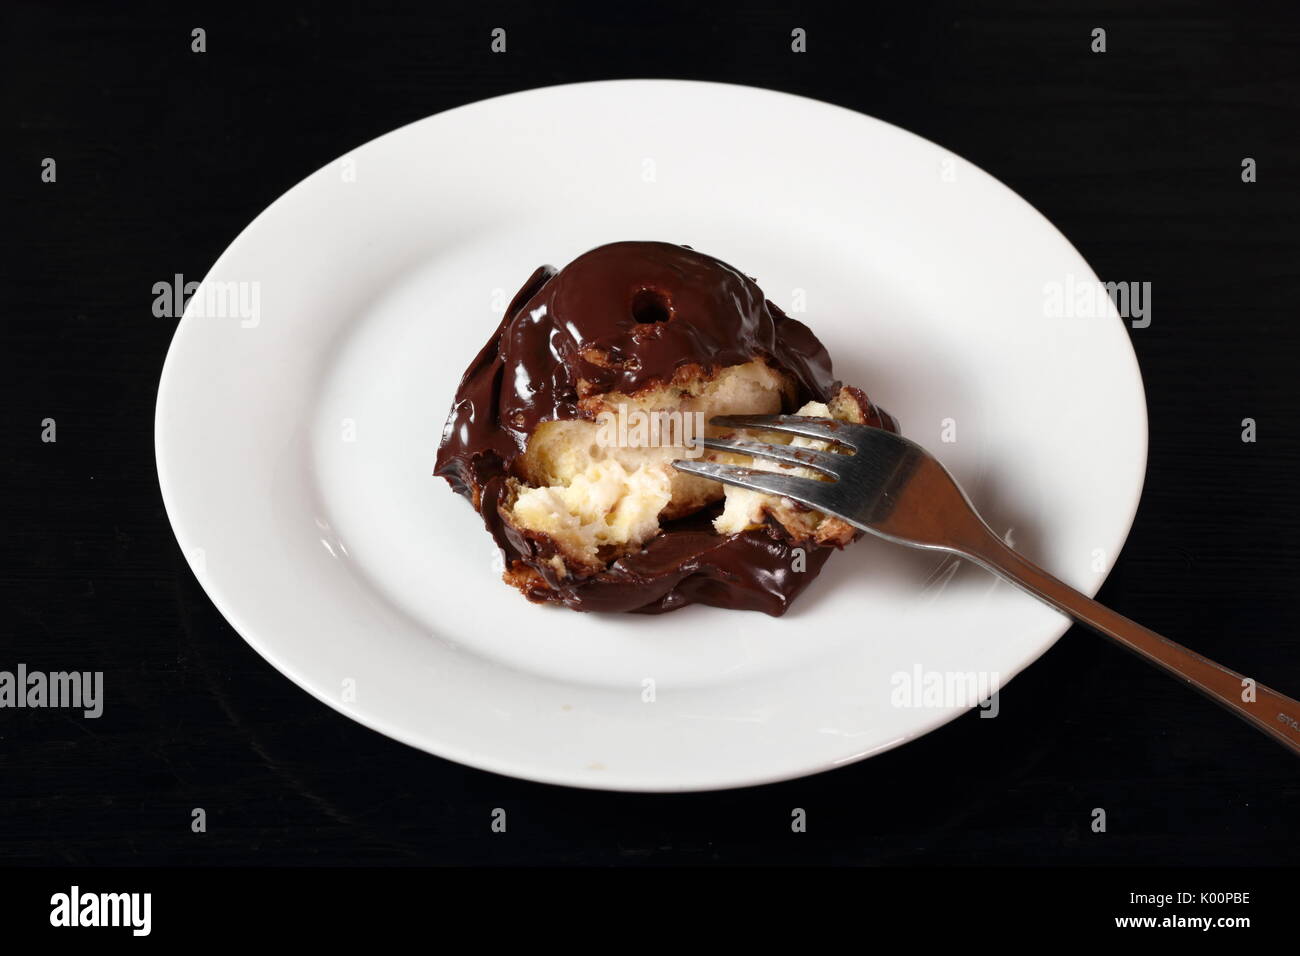 Profiterole with chocolate ganache frosting.  Choux pastry ball with custard filling and chocolate sauce icing. Stock Photo